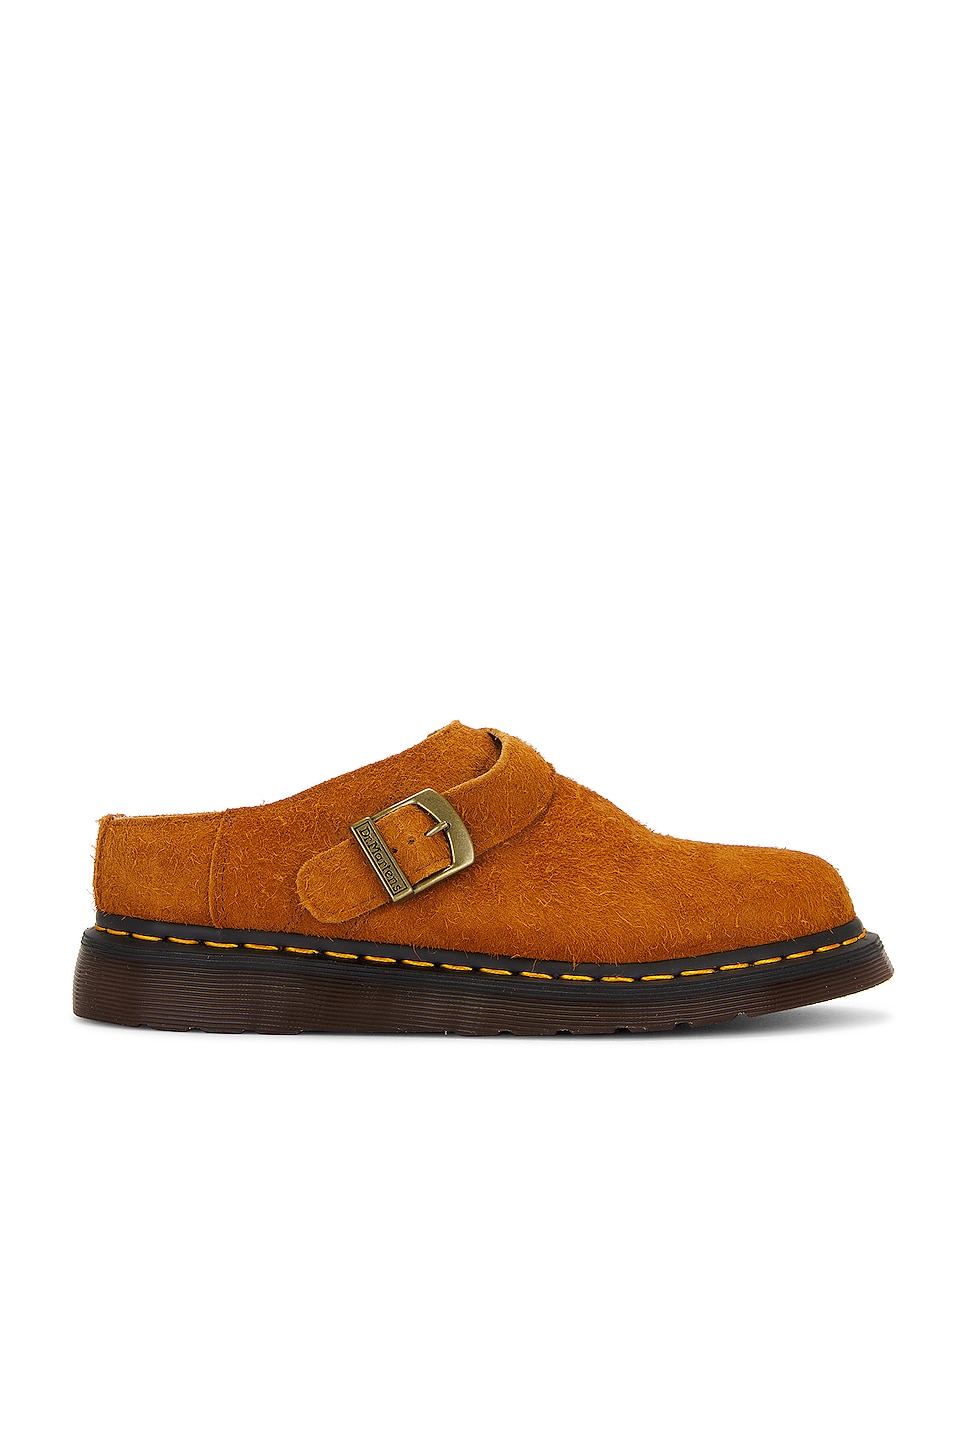 Image 1 of Dr. Martens Isham Chewbacca Suede in Toasted Nut